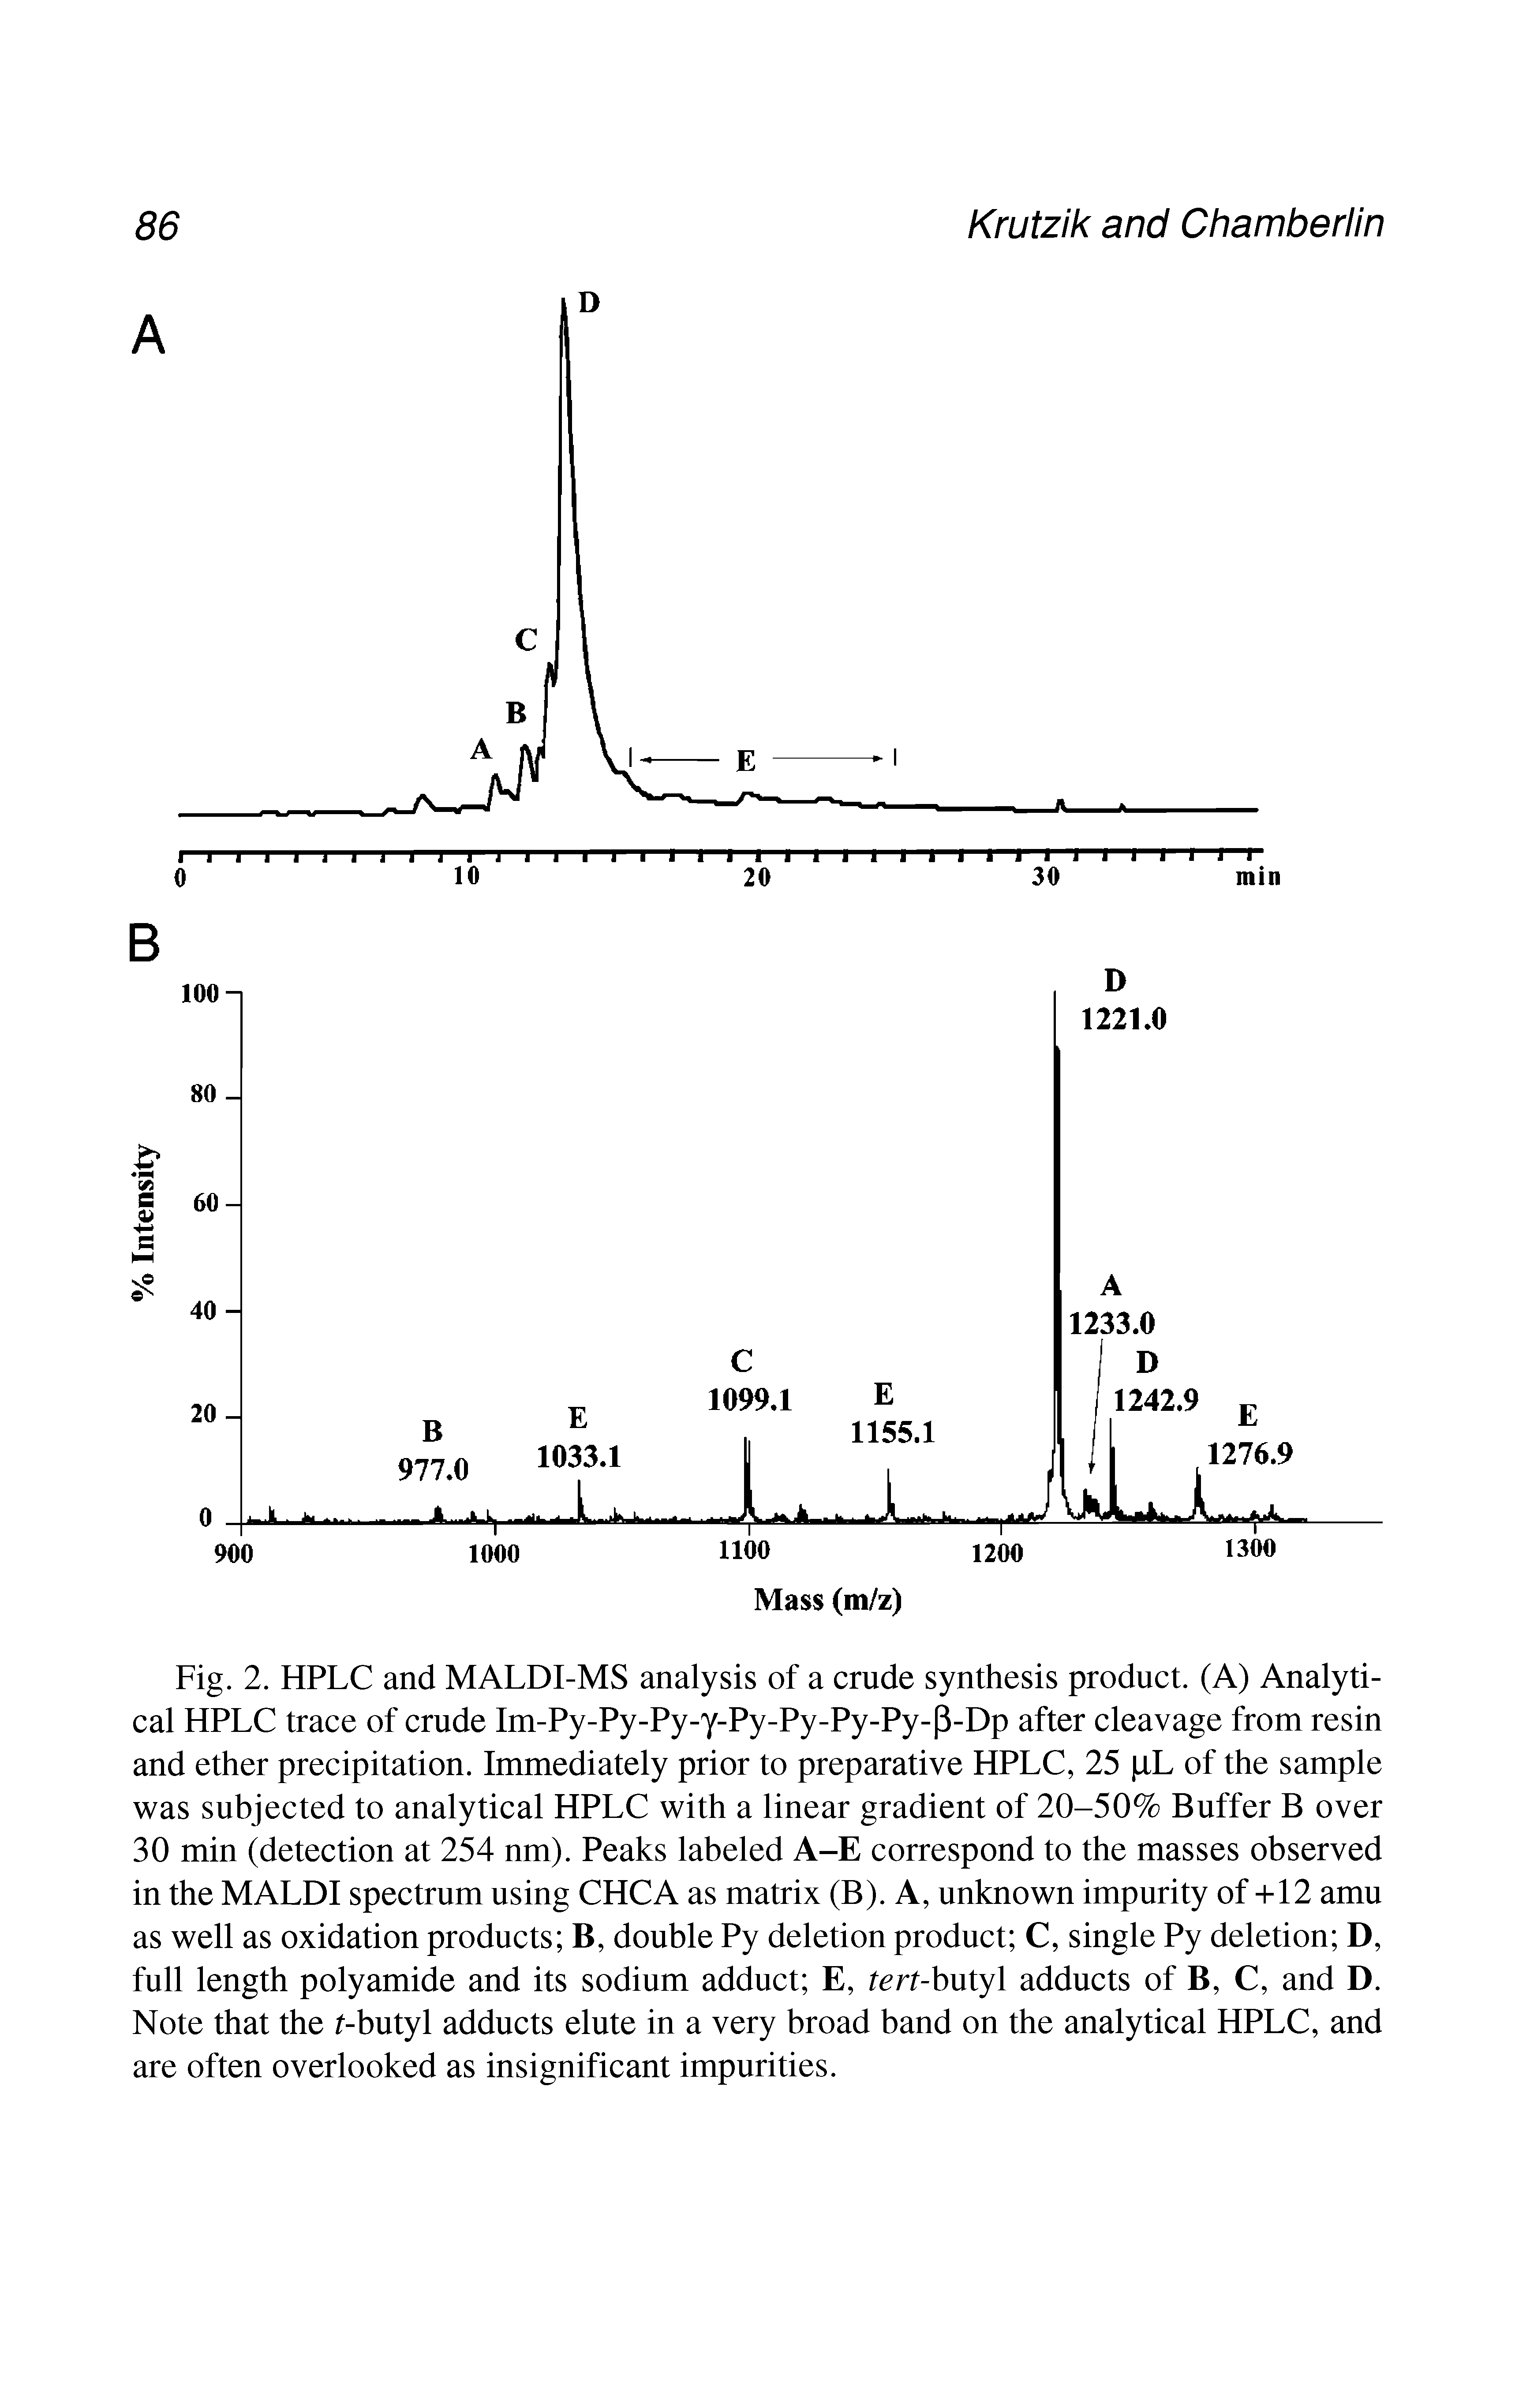 Fig. 2. HPLC and MALDI-MS analysis of a crude synthesis product. (A) Analytical HPLC trace of crude Im-Py-Py-Py-y-Py-Py-Py-Py-p-Dp after cleavage from resin and ether precipitation. Immediately prior to preparative HPLC, 25 iL of the sample was subjected to analytical HPLC with a linear gradient of 20-50% Buffer B over 30 min (detection at 254 nm). Peaks labeled A-E correspond to the masses observed in the MALDI spectrum using CHCA as matrix (B). A, unknown impurity of -1-12 amu as well as oxidation products B, double Py deletion product C, single Py deletion D, full length polyamide and its sodium adduct E, tert-huty adducts of B, C, and D. Note that the t-butyl adducts elute in a very broad band on the analytical HPLC, and are often overlooked as insignificant impurities.